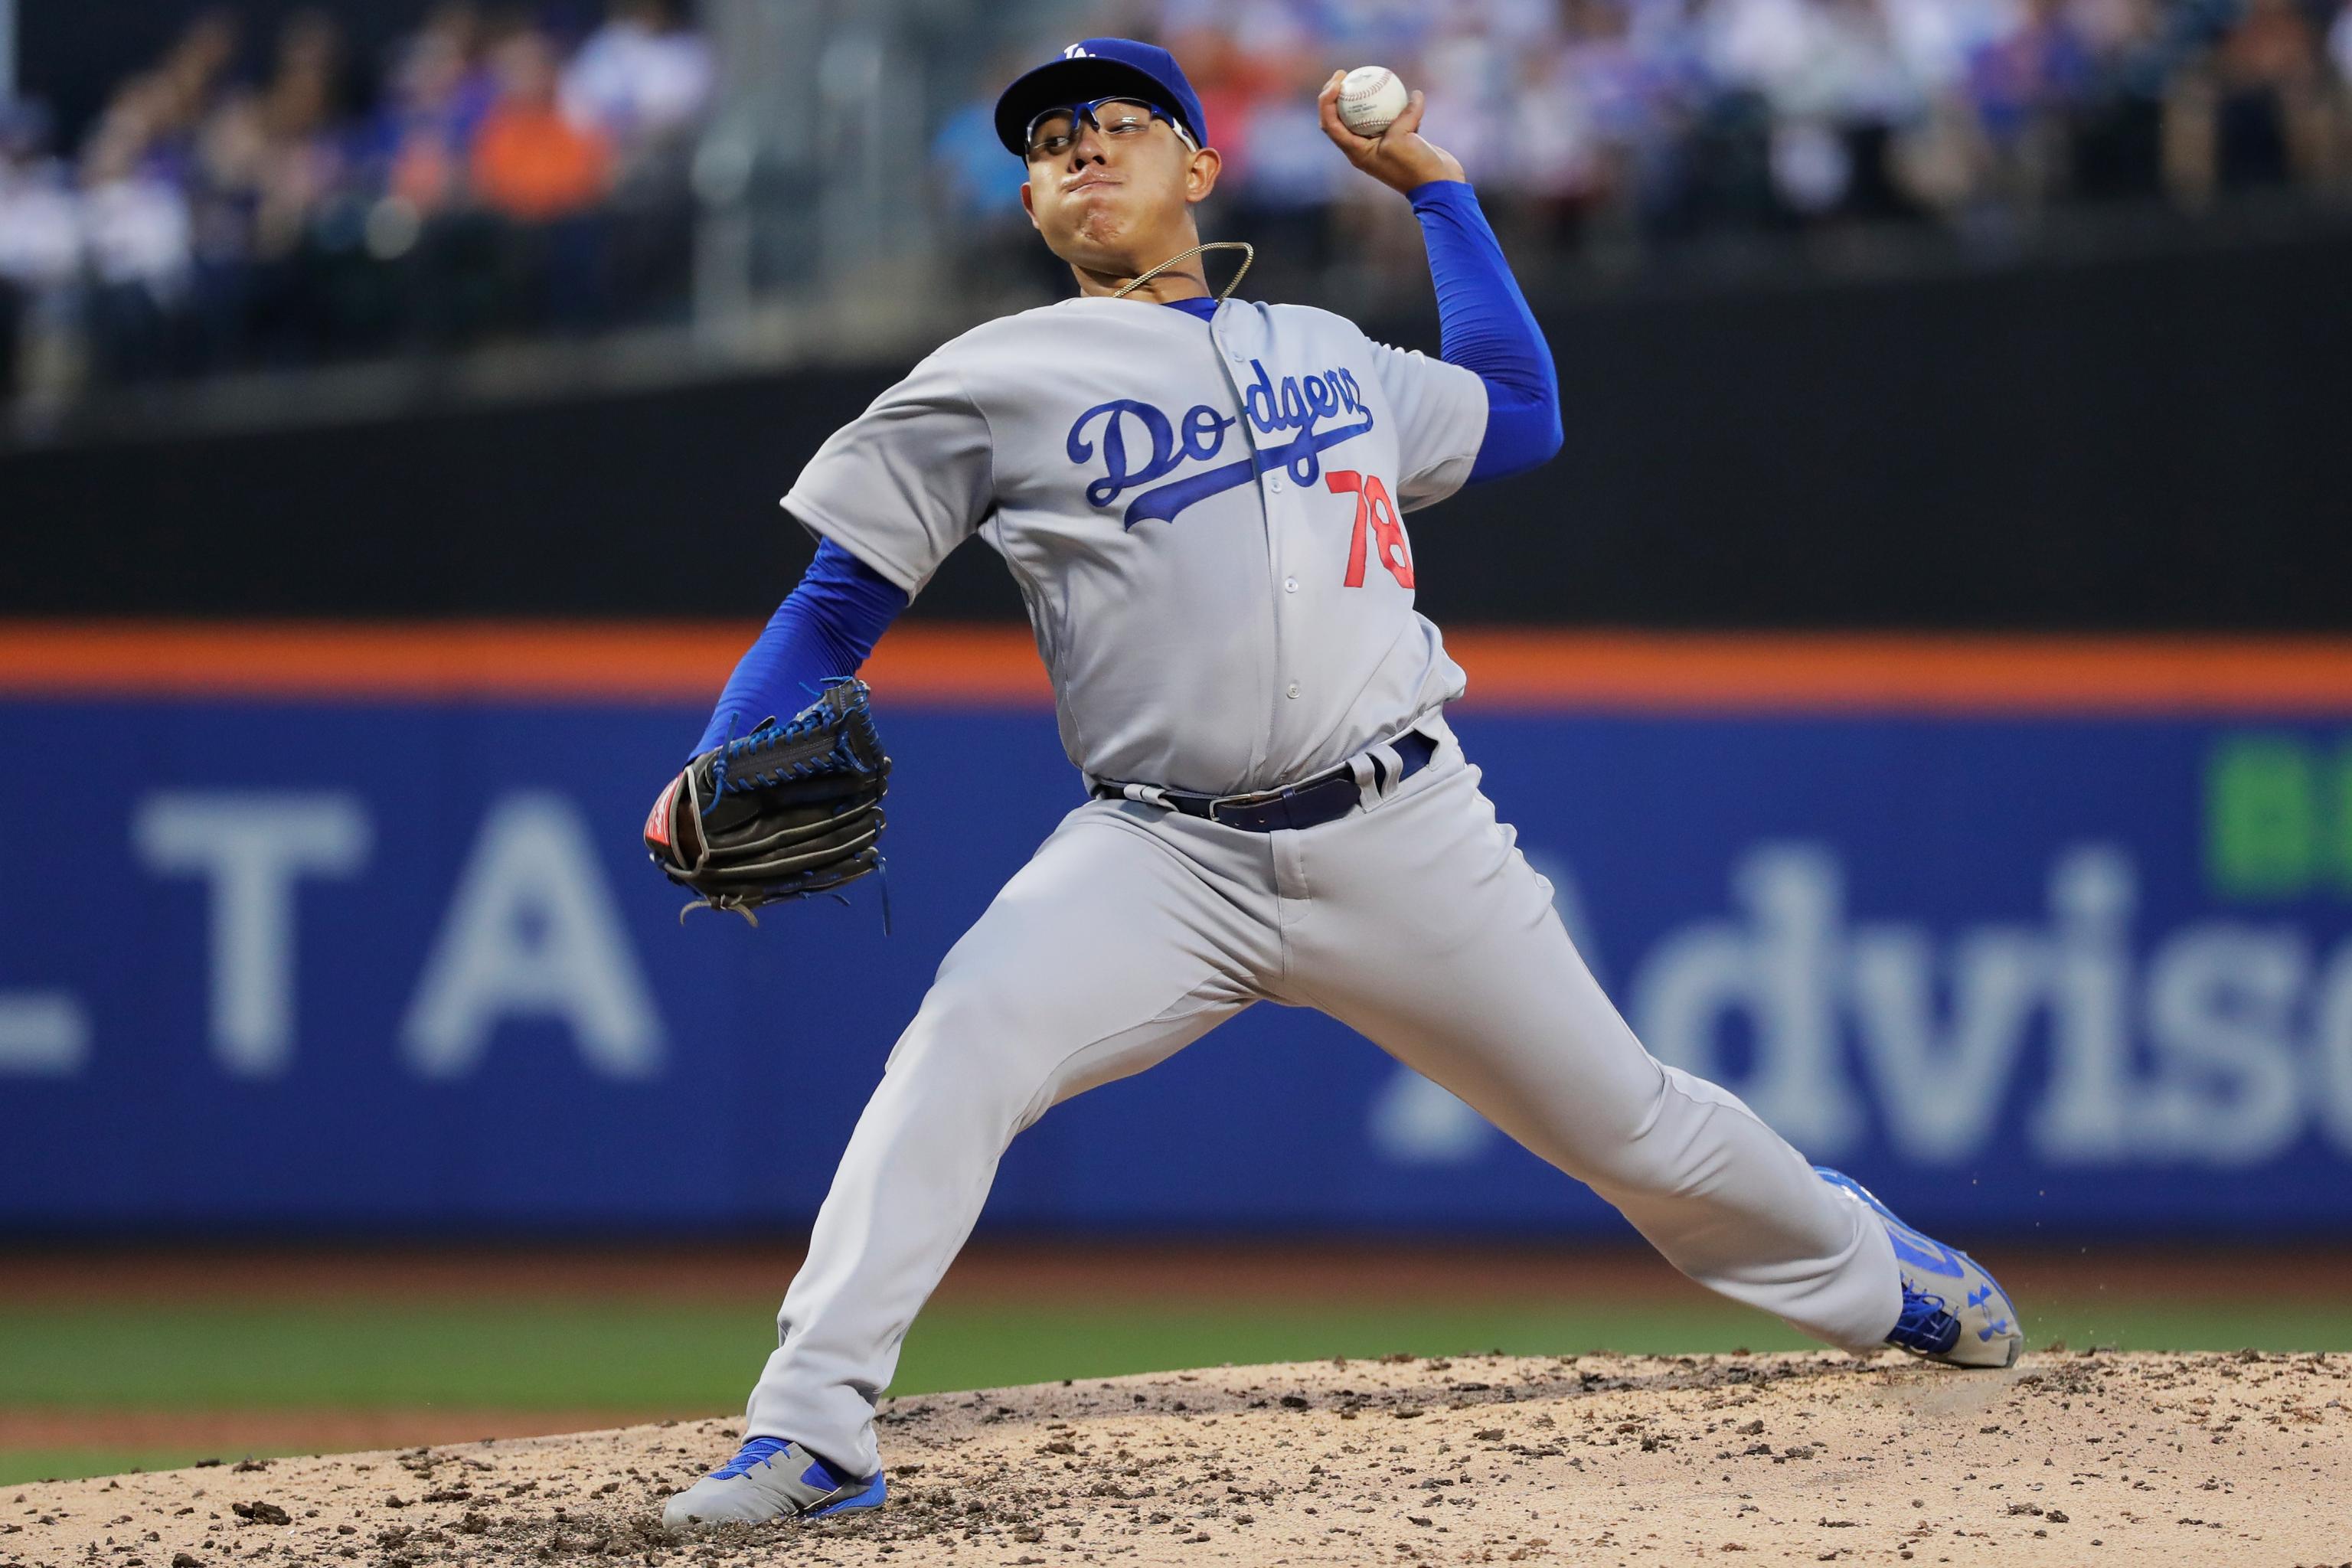 Julio Urias Cements Place As Top Pitching Prospect Made Good With ERA Title  — College Baseball, MLB Draft, Prospects - Baseball America